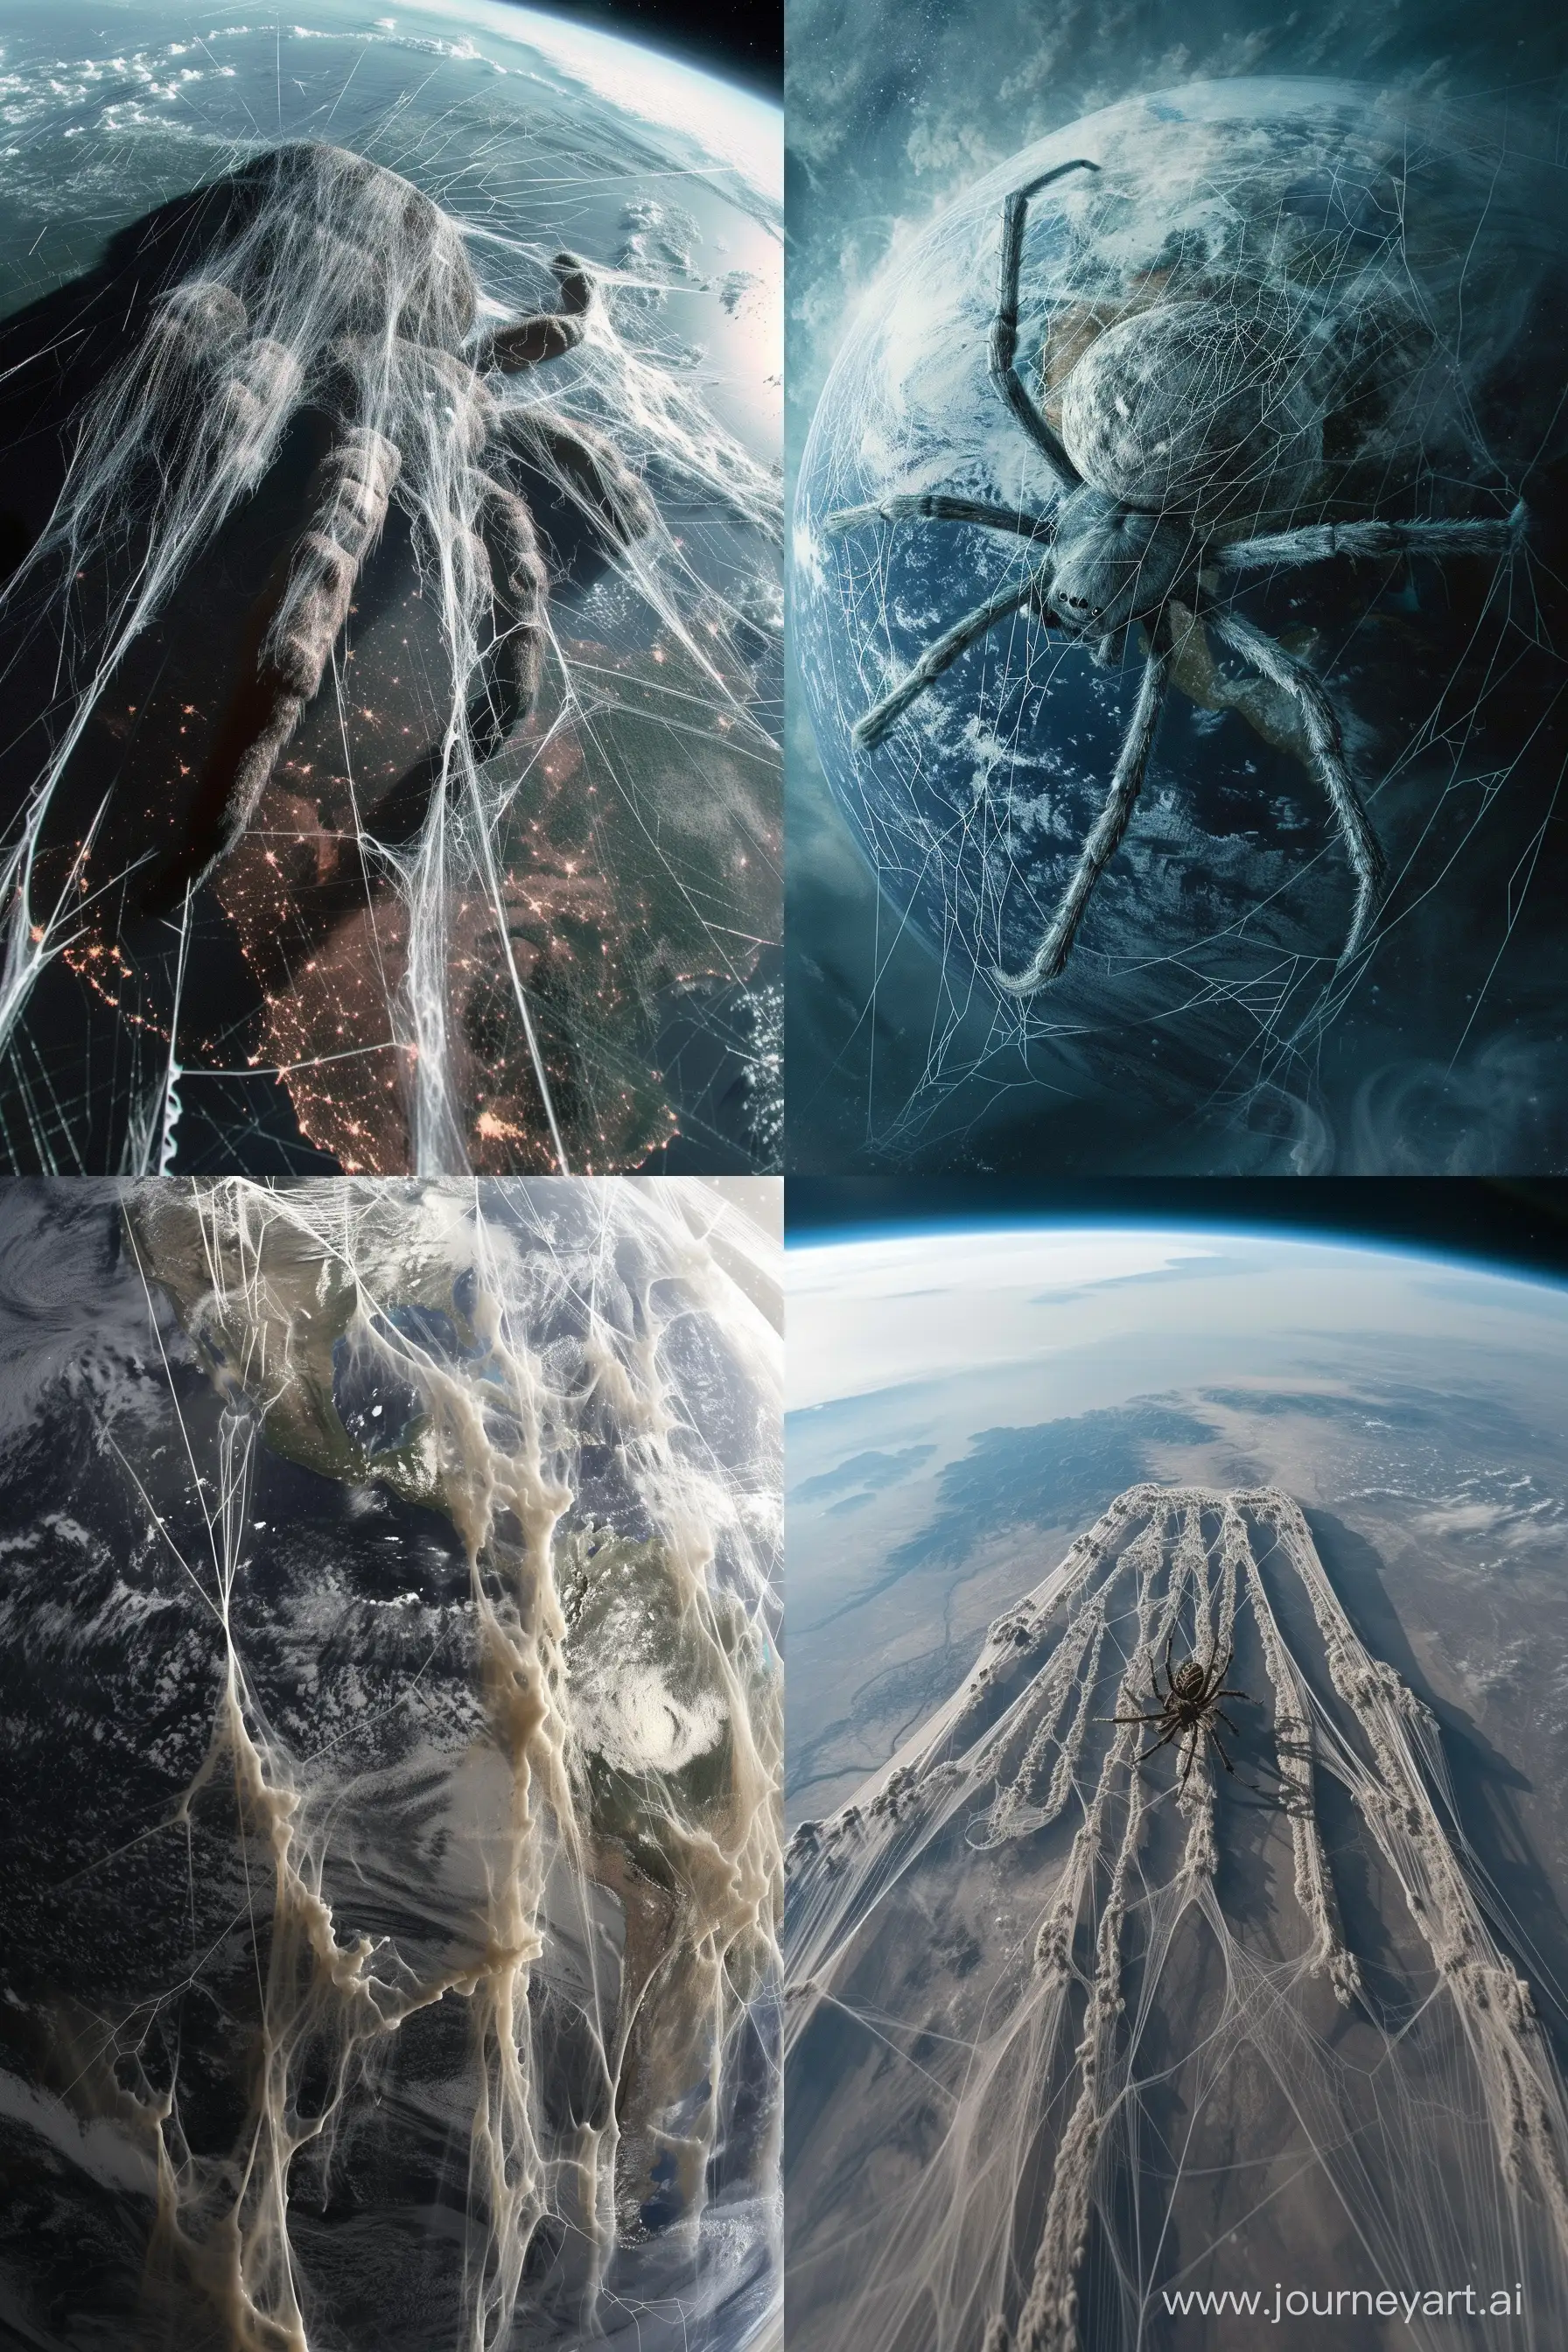 color photo of a satellite view from space, capturing a massive spider crawling across the entirety of planet Earth. The aerial view of bird's-eye perspective satellite image offers a breathtaking view of the planet, as the spider weaves an intricate and menacing web that engulfs the Earth in its entirety. The thick strands of the spiderweb drape over the surface, with excess webbing dangling in Earth's atmosphere like ethereal tendrils. The overall scene is cloaked in a creepy, sinister atmosphere, evoking a sense of abandonment and desolation. The color grading intensifies the eerie mood, with deep shadows and muted tones, further emphasizing the feeling that Earth has been forsaken. This captivating image serves as a haunting reminder of the spider's overpowering presence and the absence of humanity. —c 10 —ar 2:3